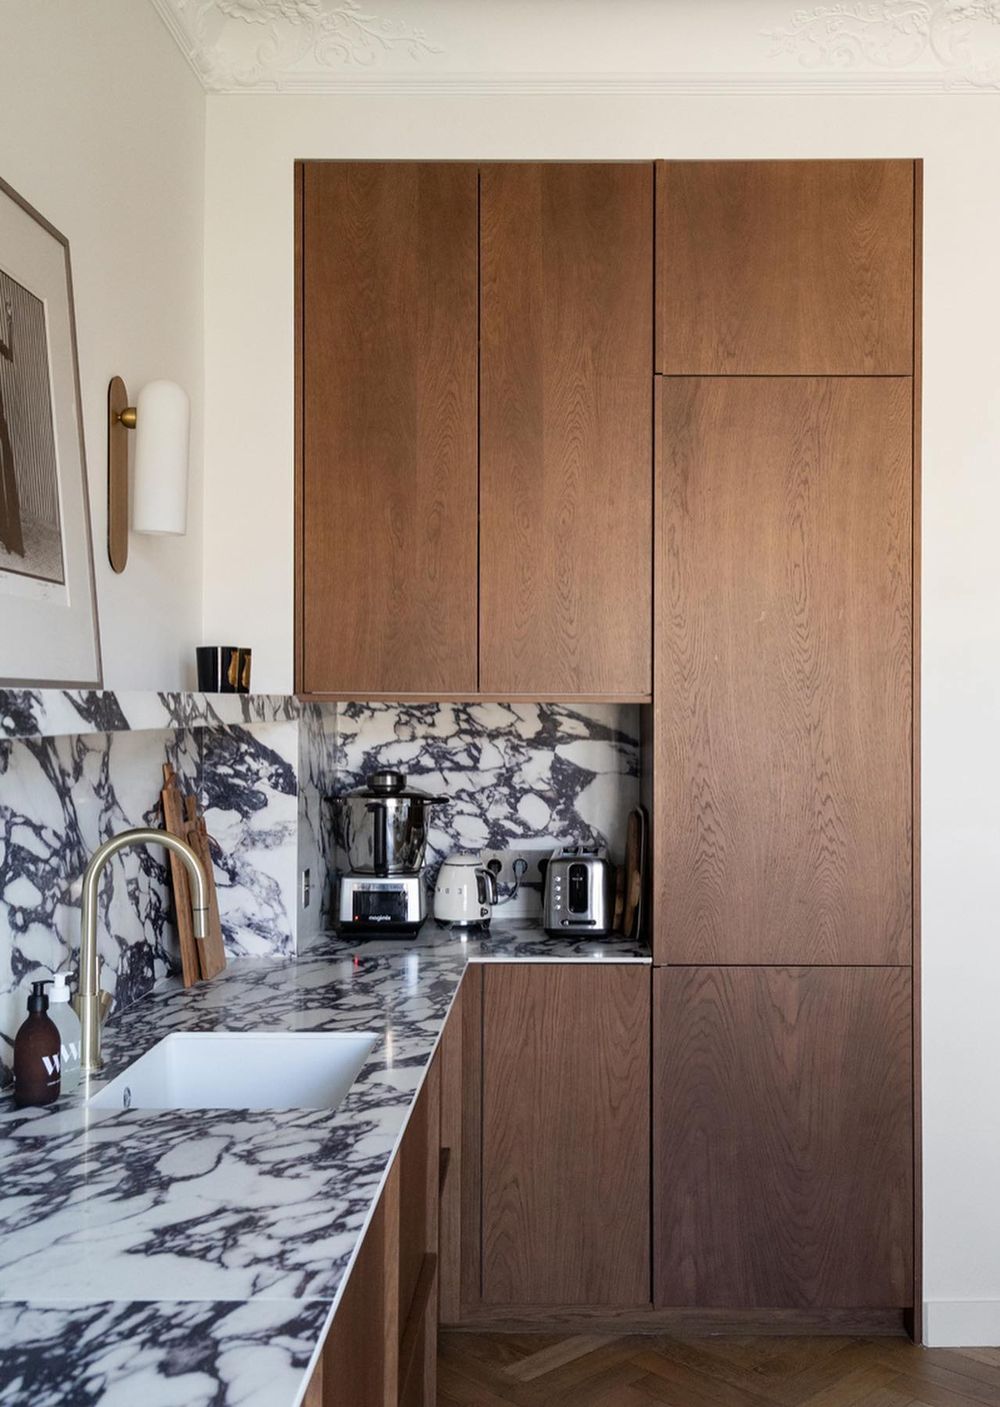 Marble kitchen countertops Caramel wood cabinets @bcdfstudio